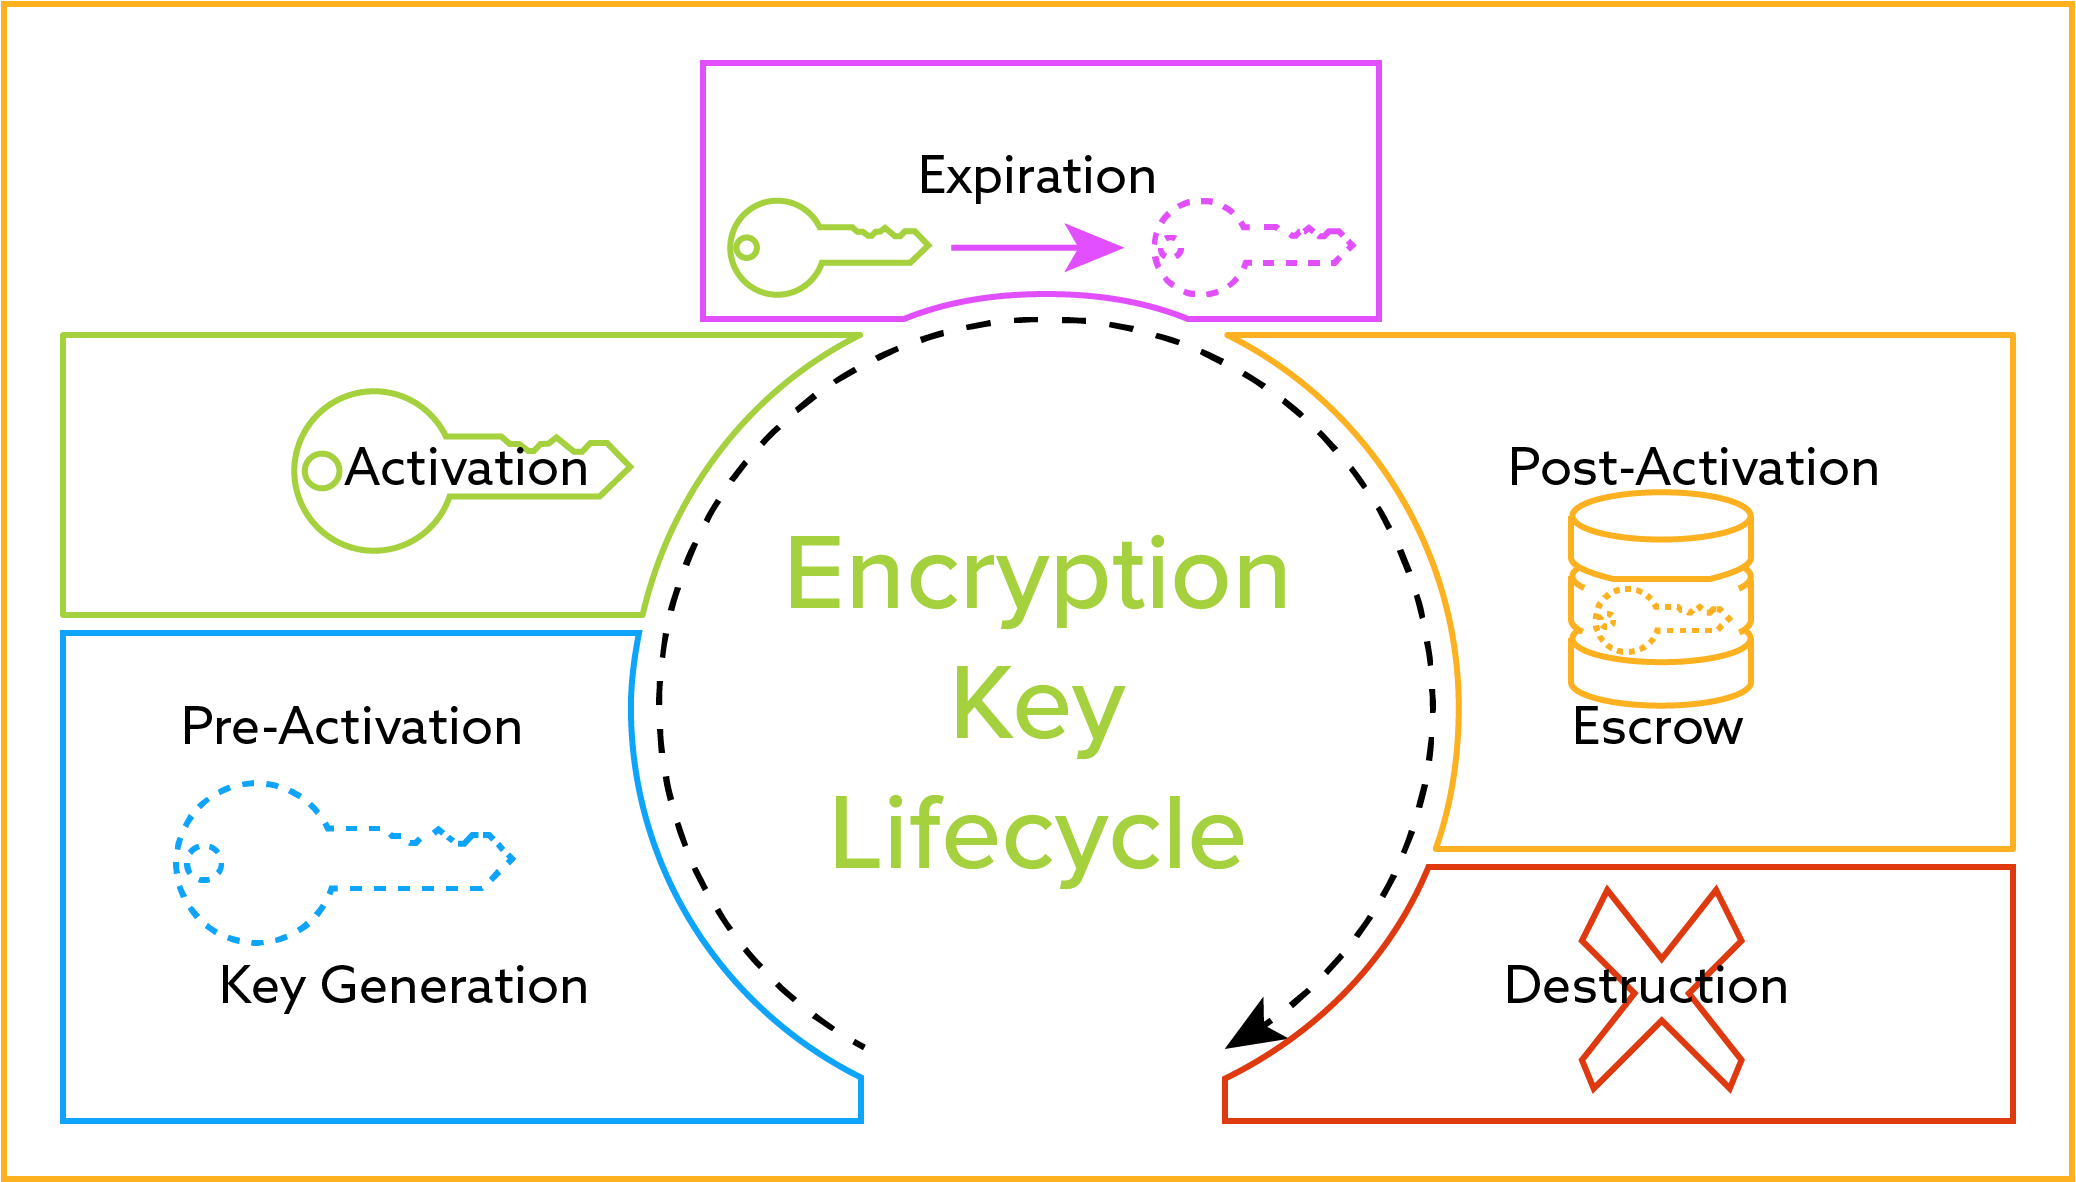 How to properly store encryption key